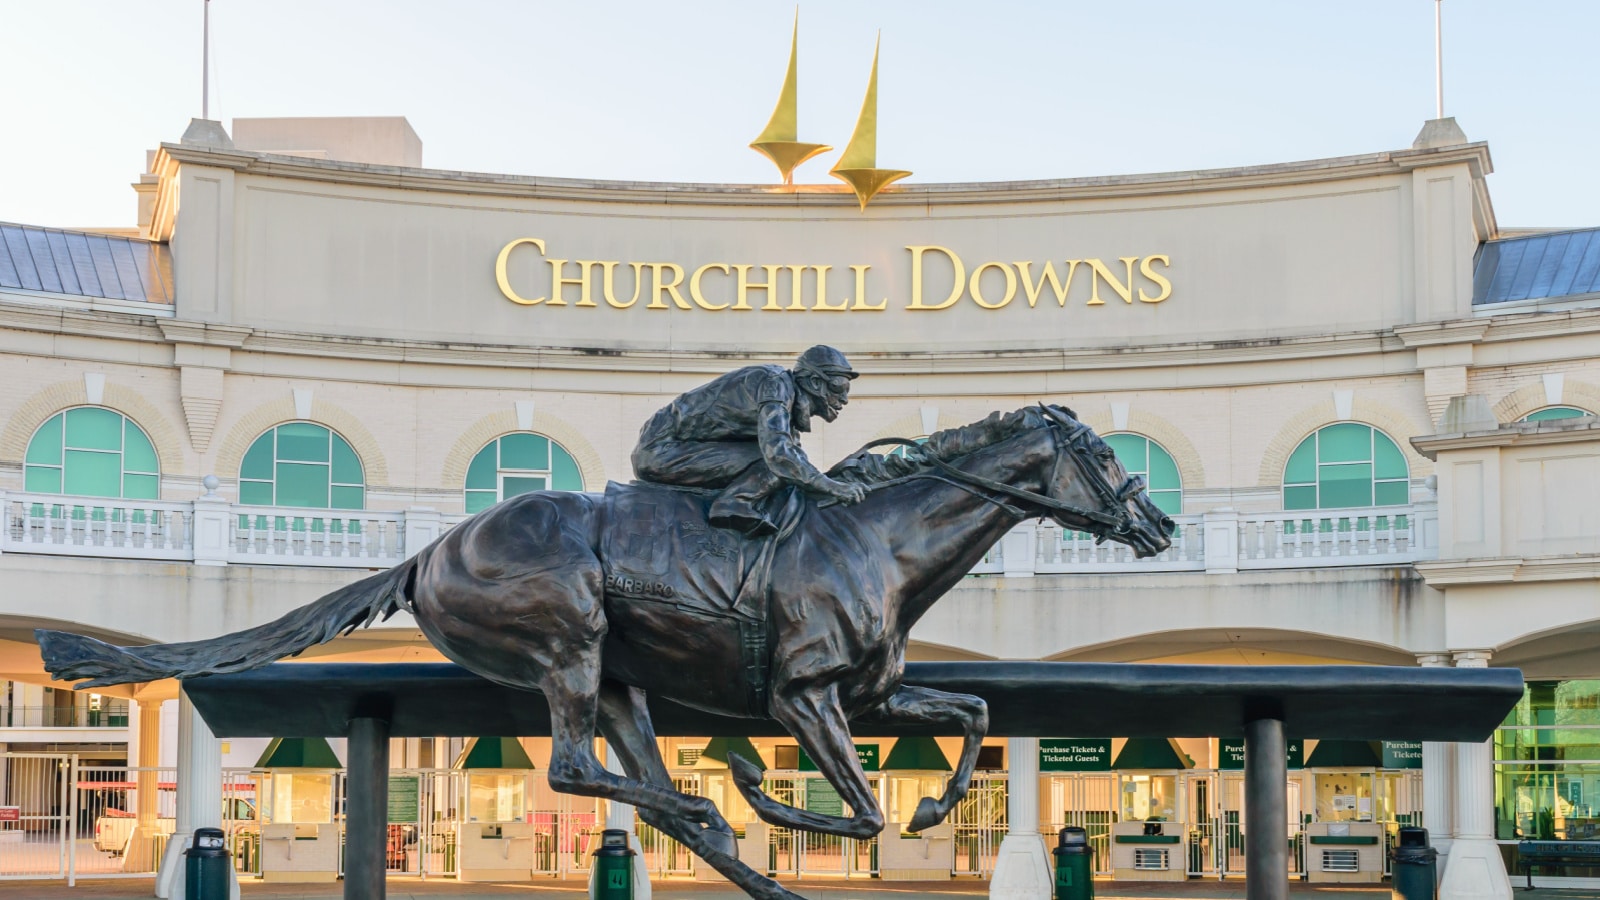 LOUISVILLE, KENTUCKY, USA - APRIL 3 2016: Entrance to Churchill Downs featuring a statue of 2006 Kentucky Derby Champion Barbaro.